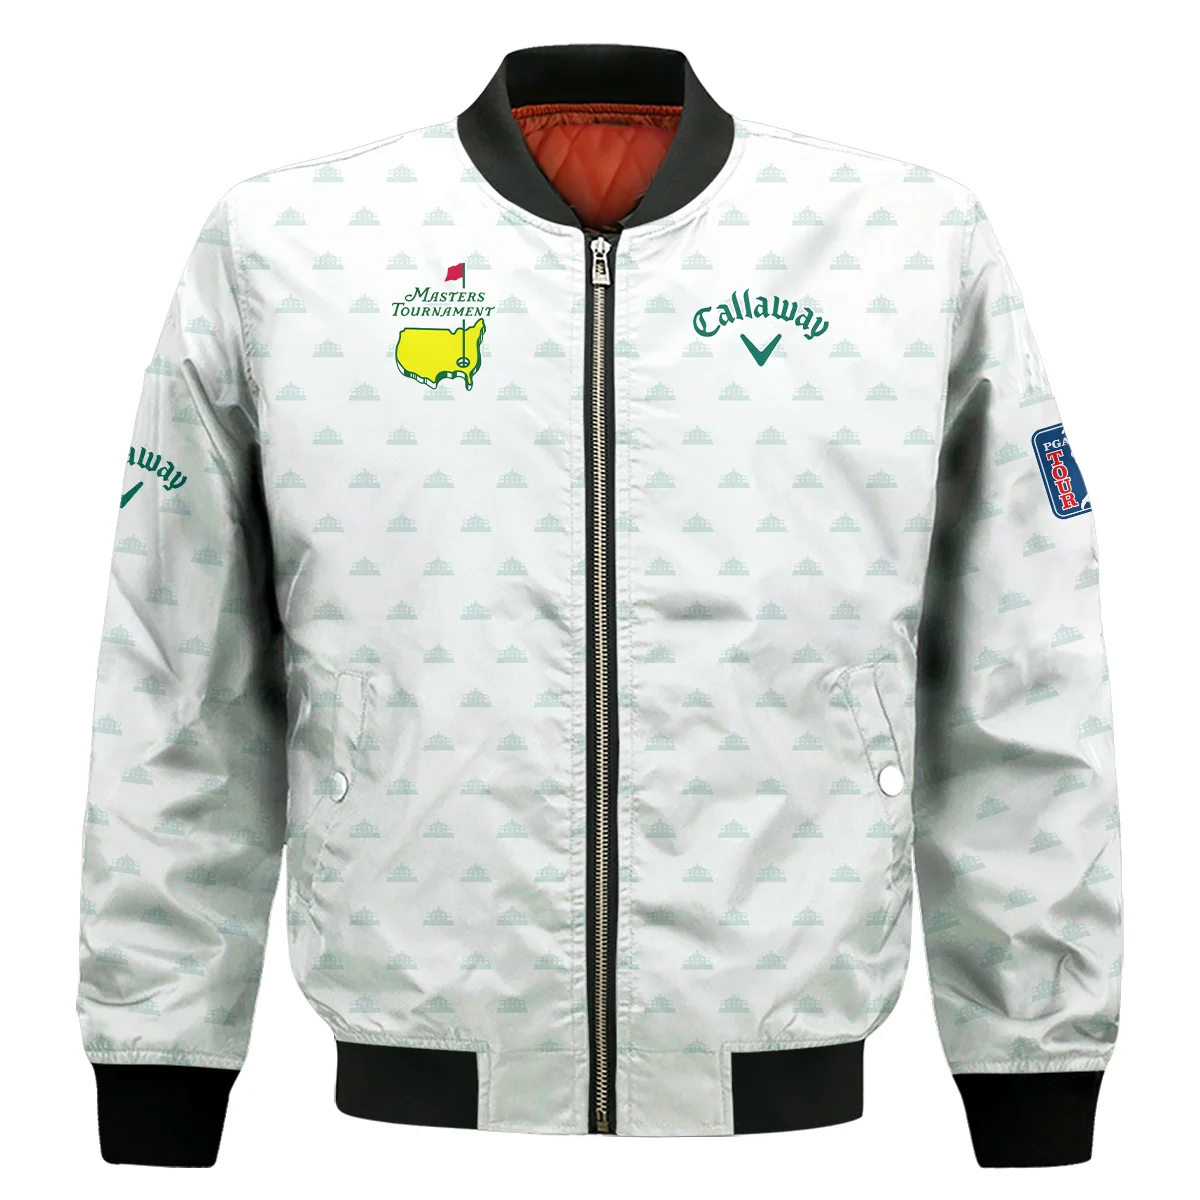 Golf Masters Tournament Callaway Bomber Jacket Cup Pattern White Green Golf Sports Bomber Jacket GBJ1331